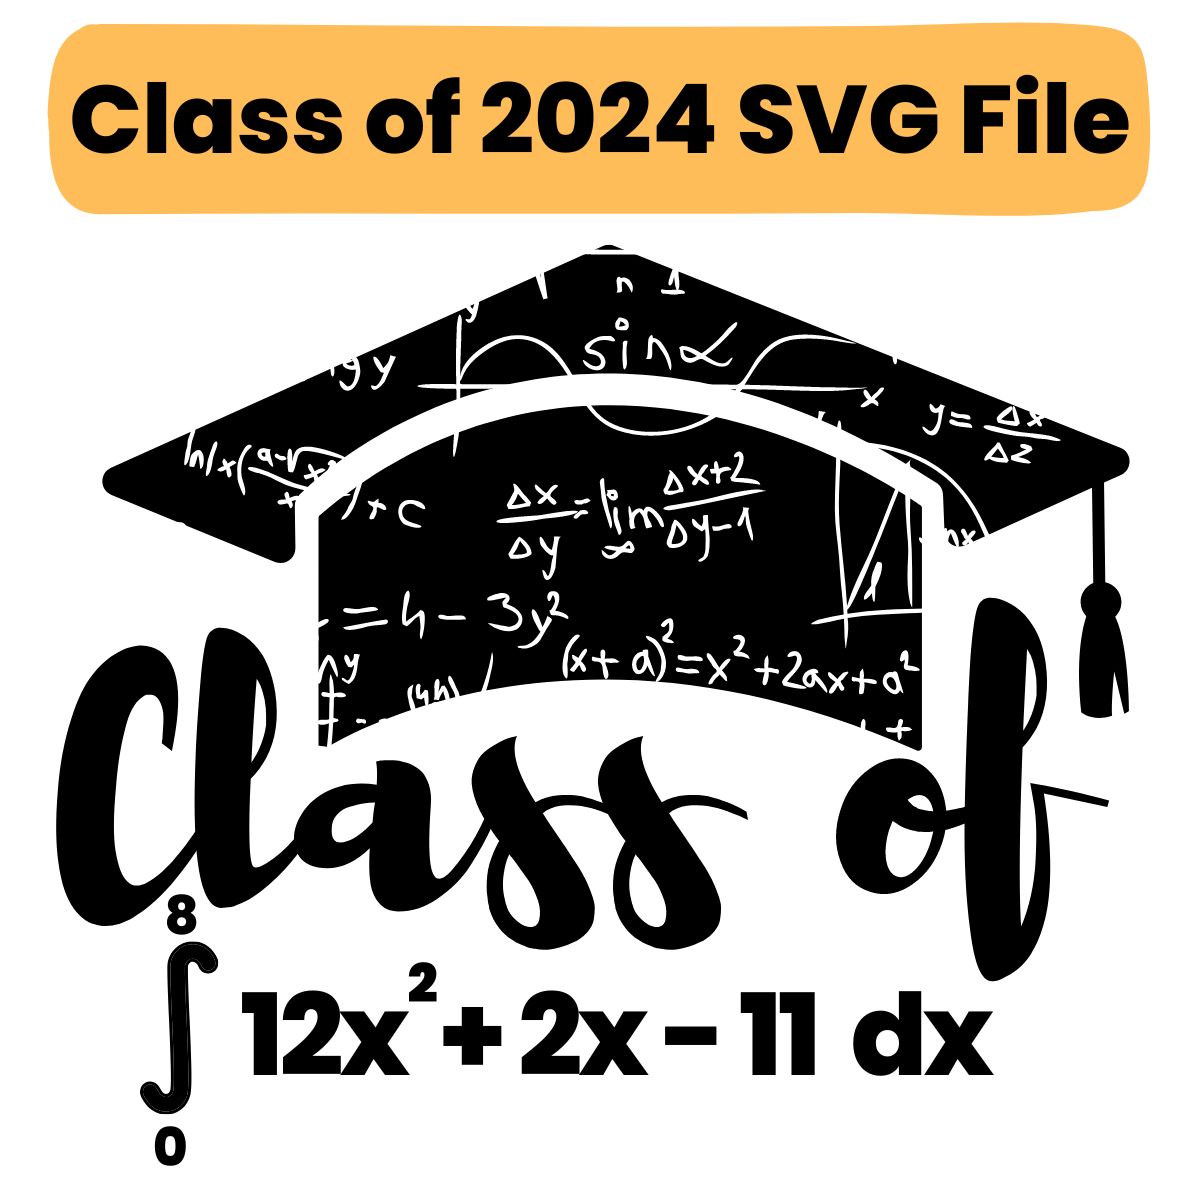 It's that time of year again! I have updated the blog post for my calculus graduation stickers with files for the classes of 2024-2028. mathequalslove.net/calculus-gradu… #mtbos #iteachmath #apcalculusab #apcalculus #calchat